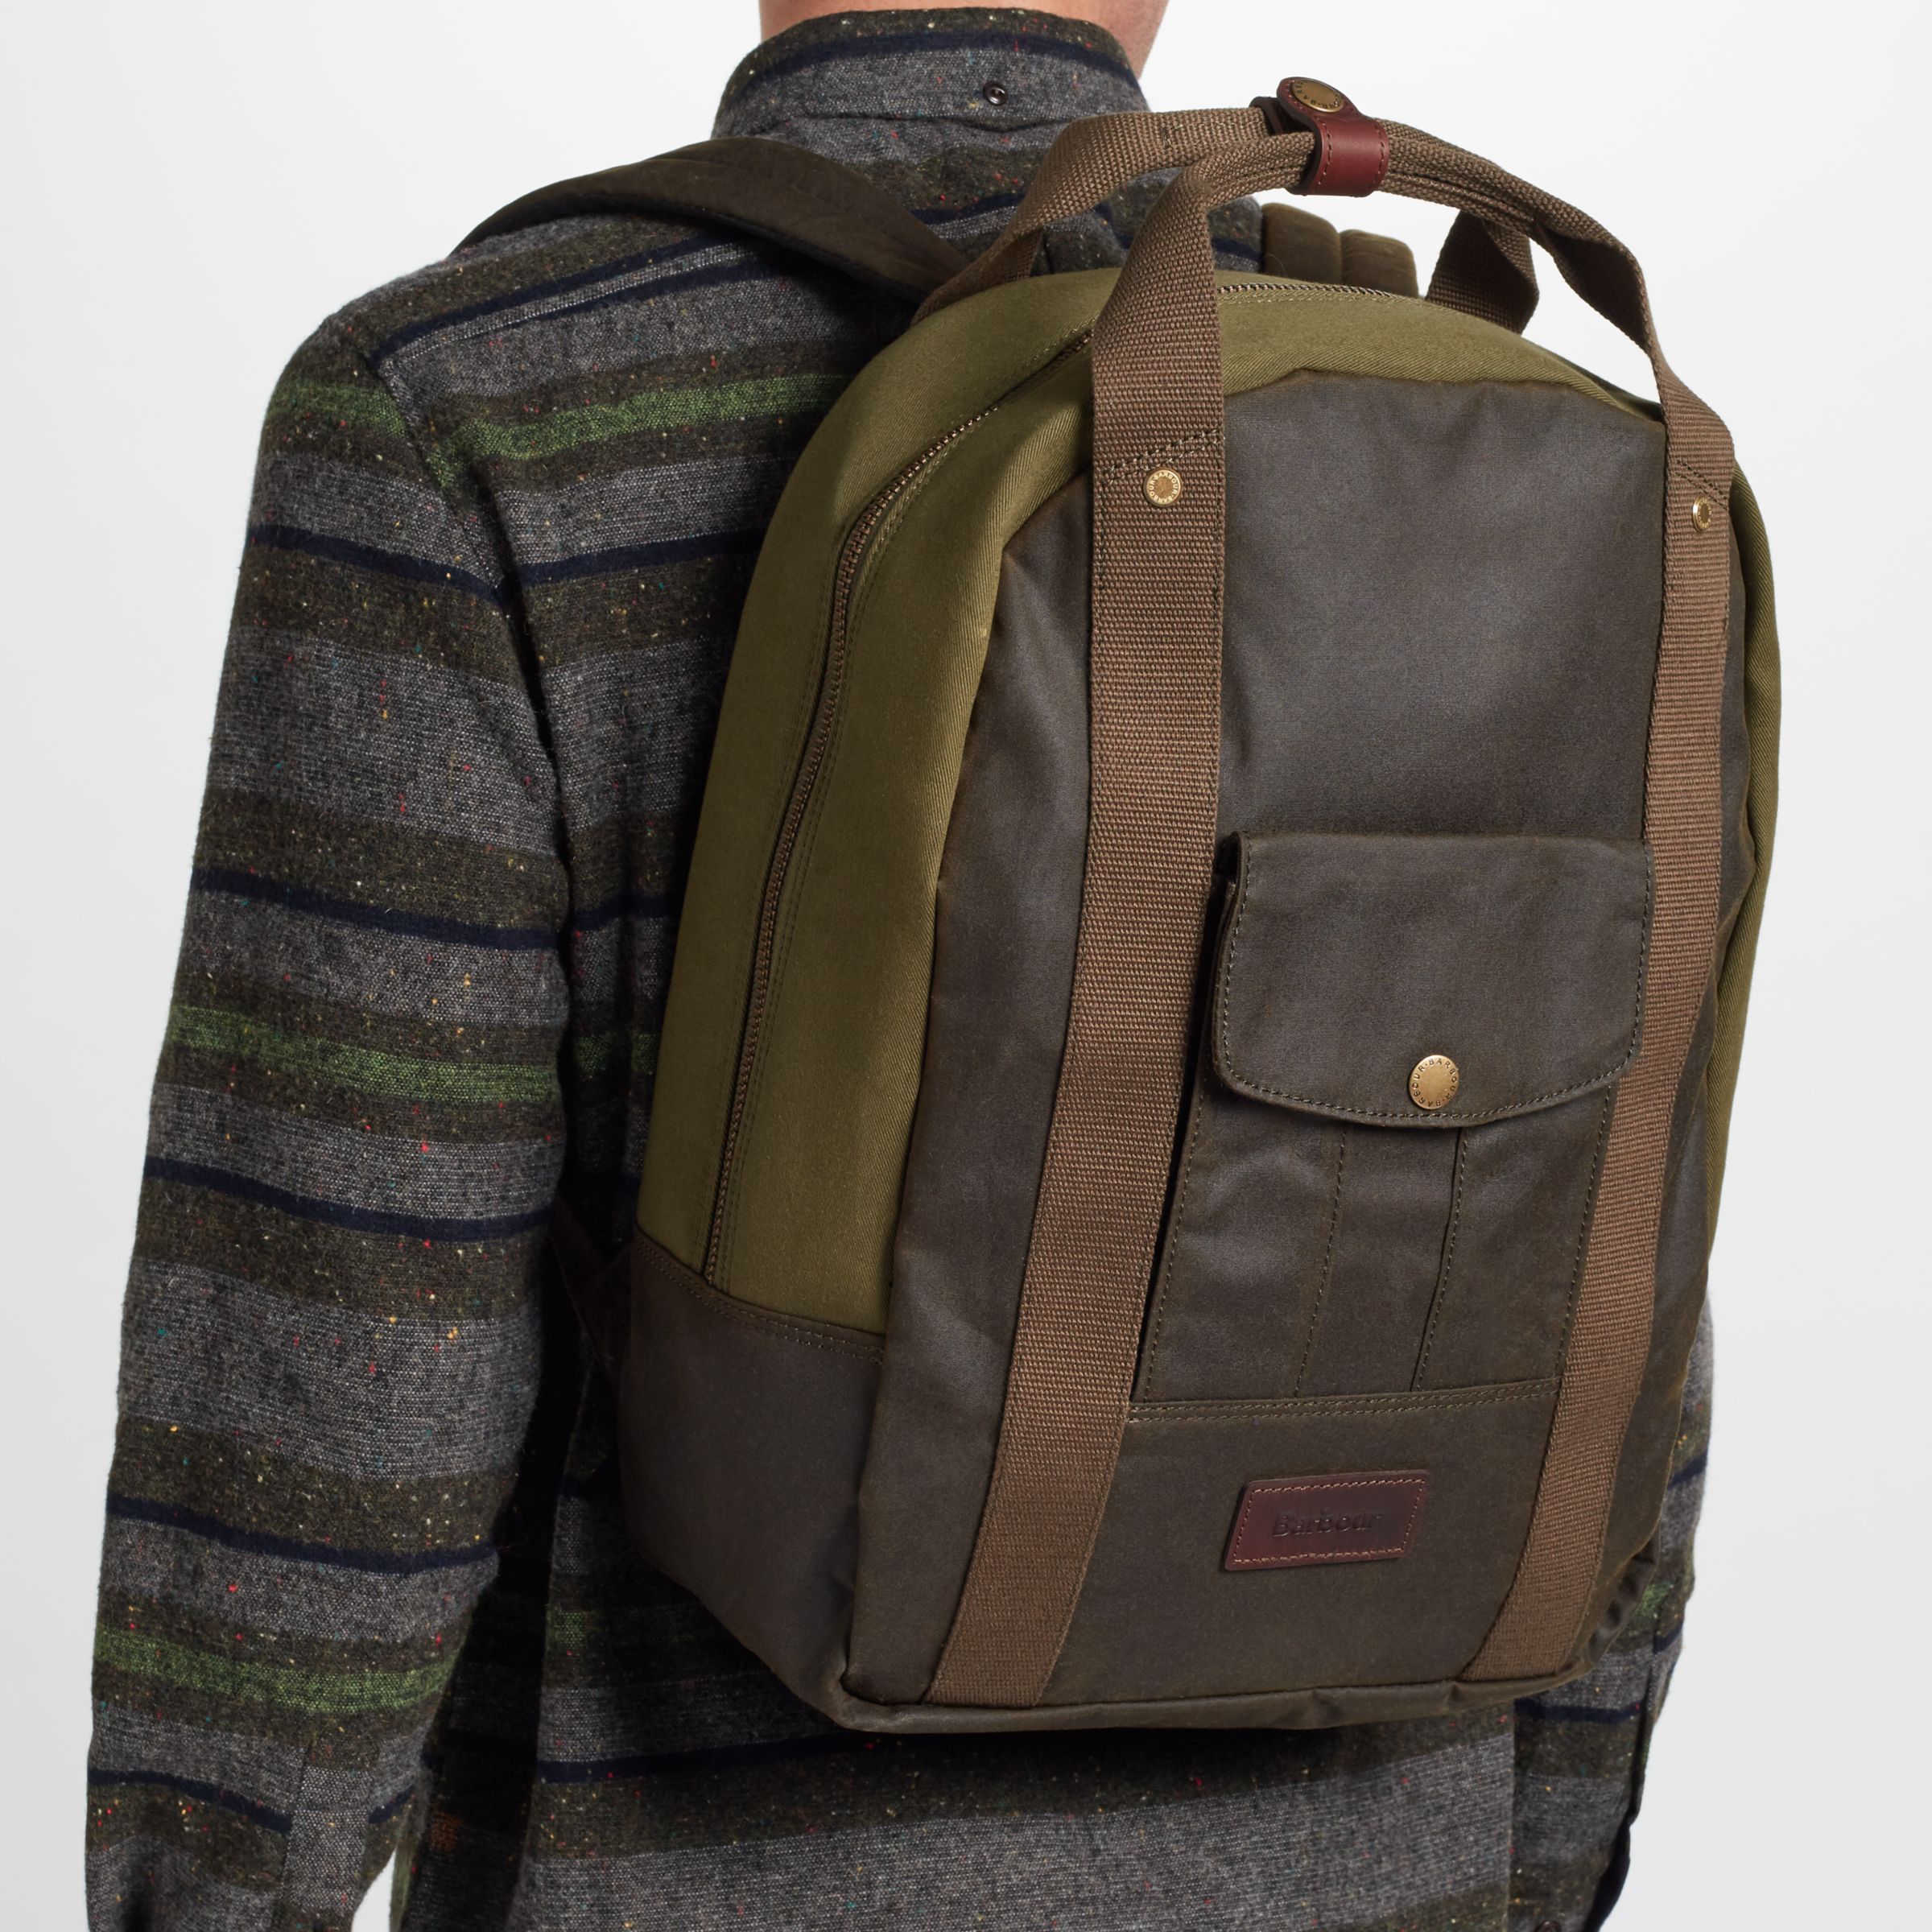 Barbour Archive Waxed Cotton Backpack, Olive at John Lewis & Partners